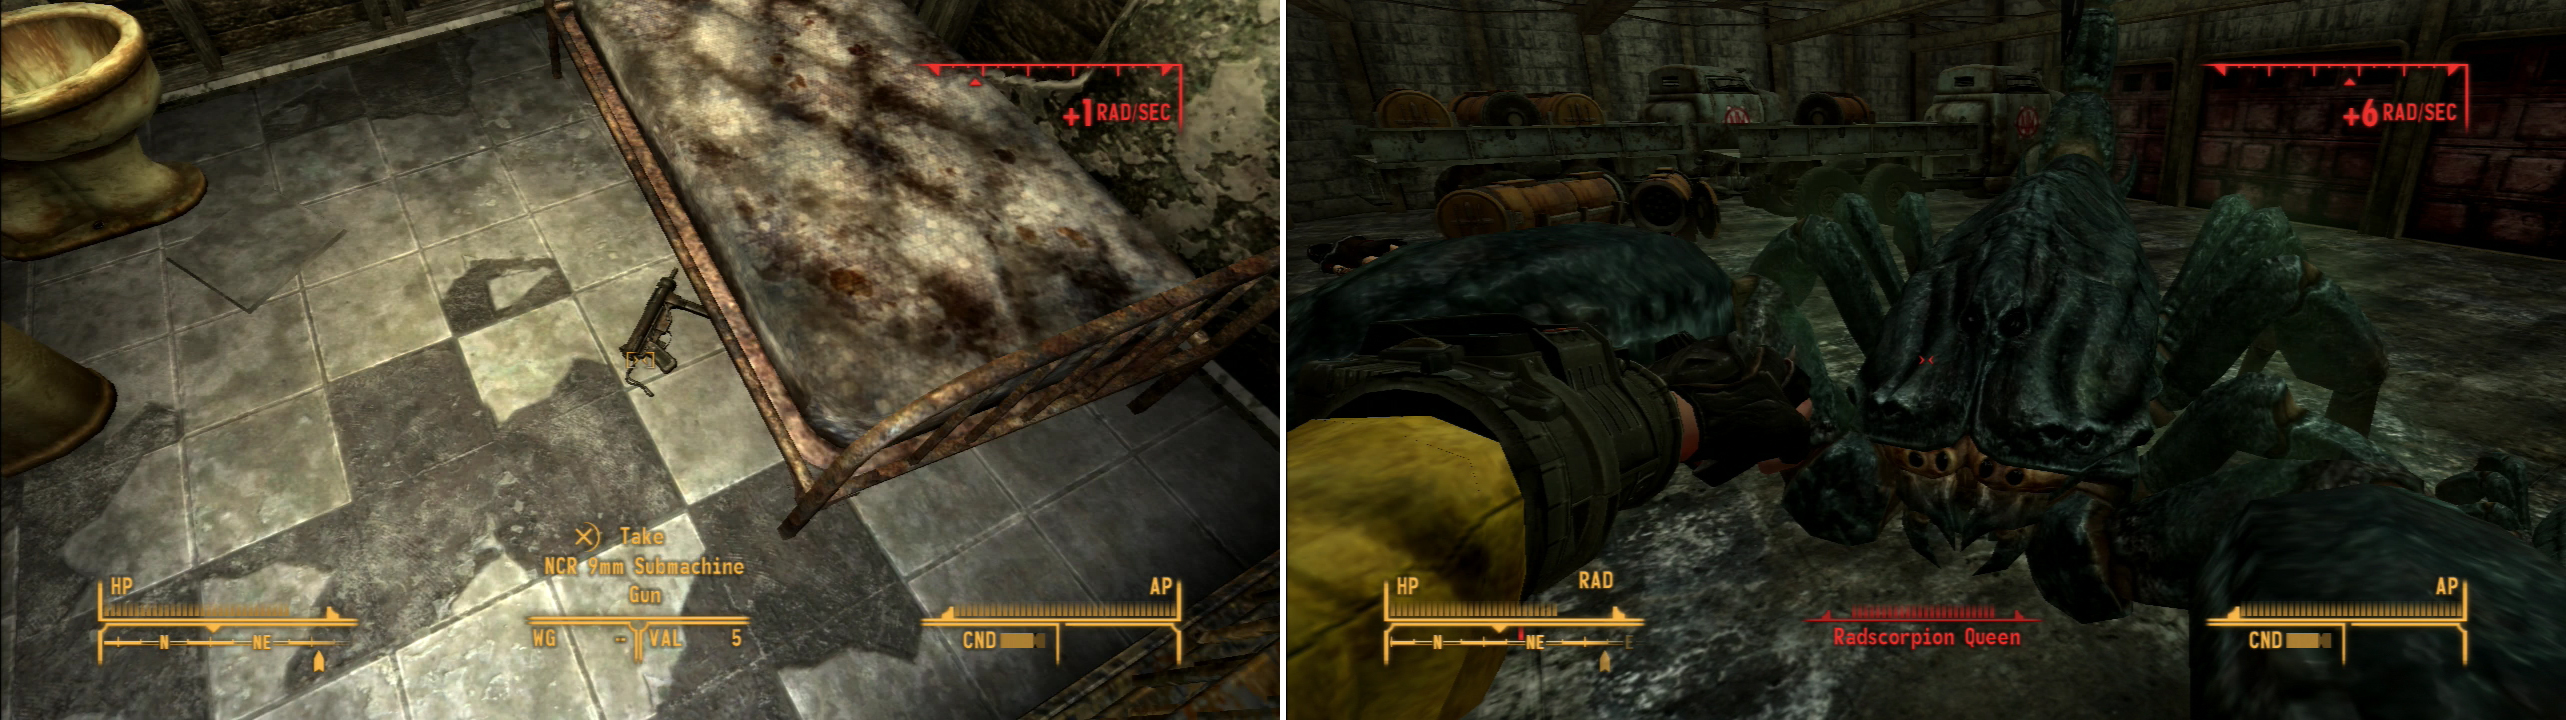 Pick up salvagable NCR equipment (left) but be wary; the radiation is attractive to some creatures, like this massive Radscorpion Queen (right).